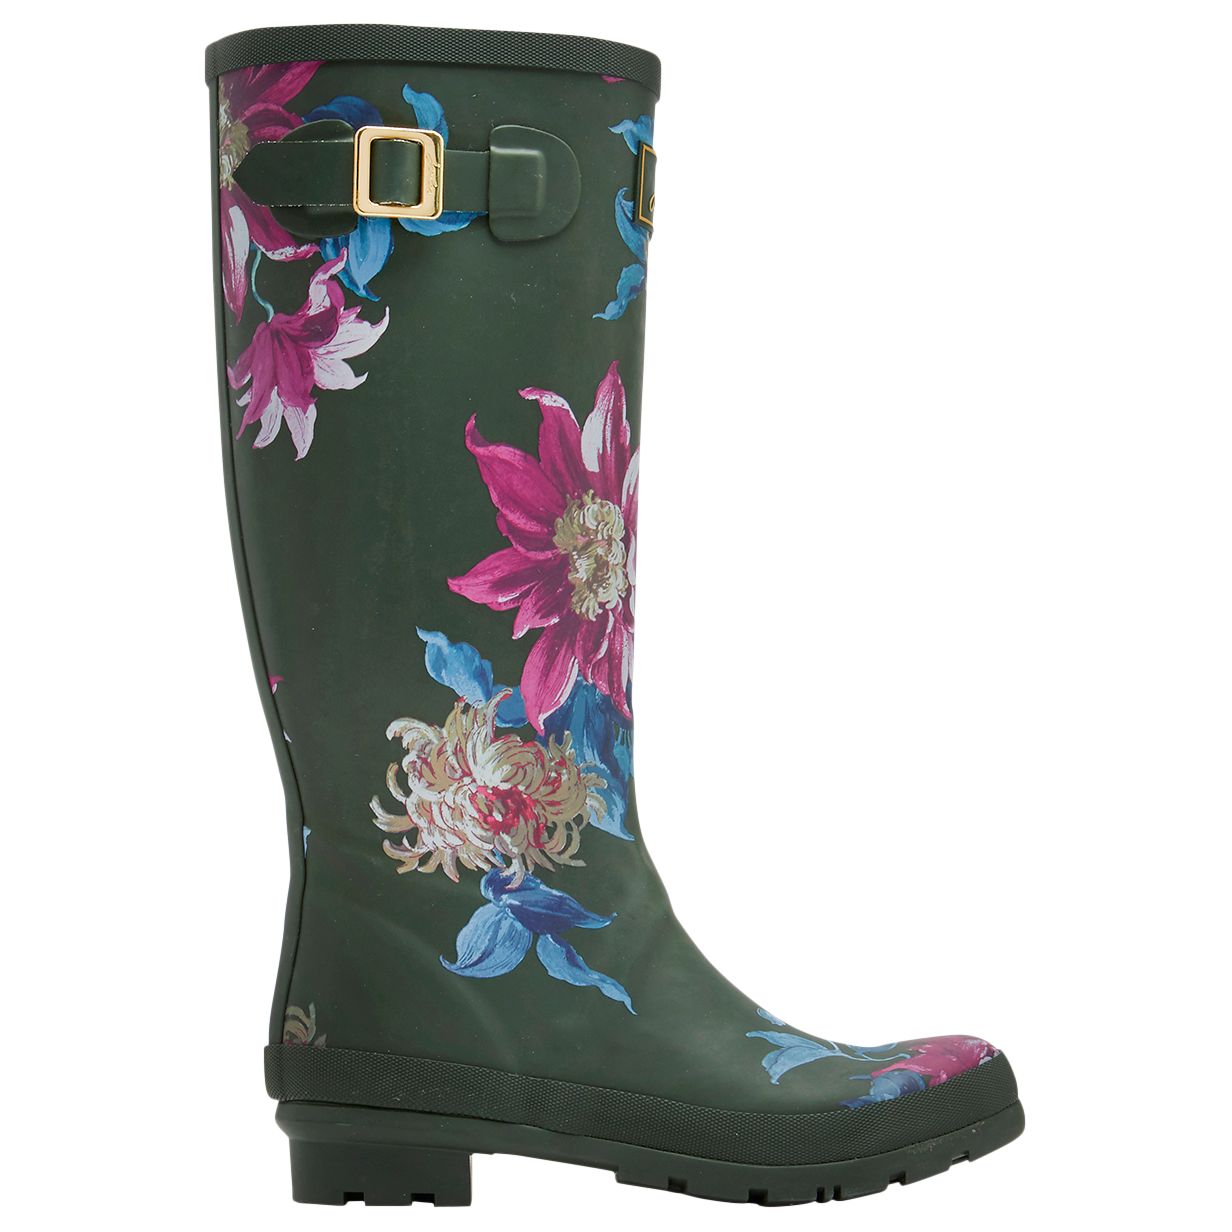 Joules Tall Floral Print Wellington Boots Reviews